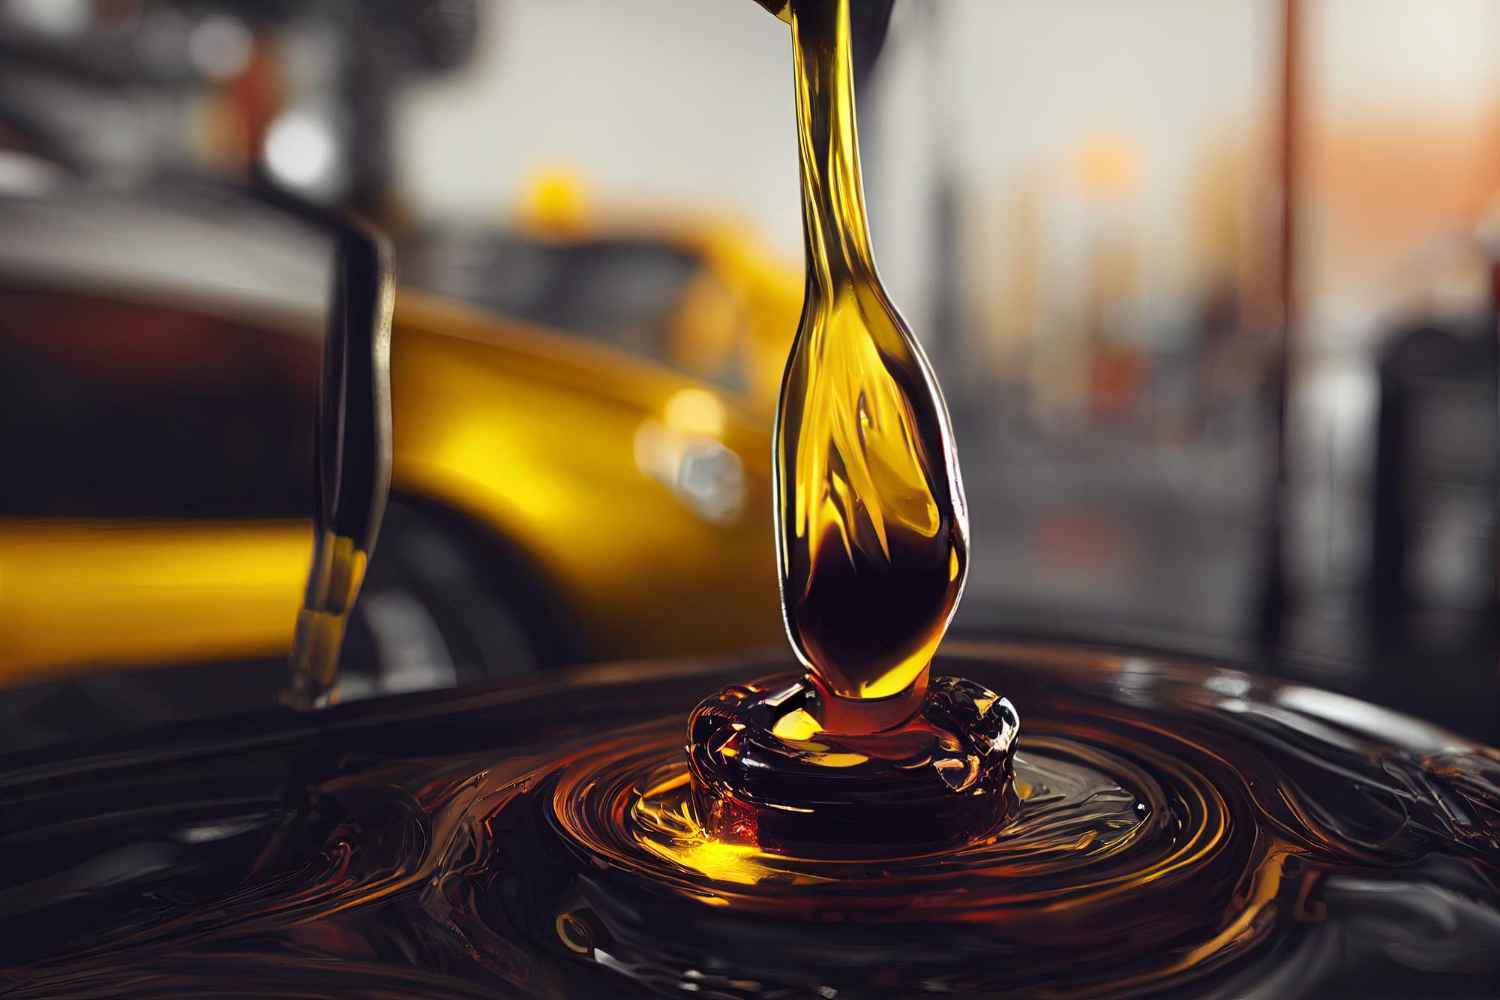 Classification and Information of Hydraulic Oil